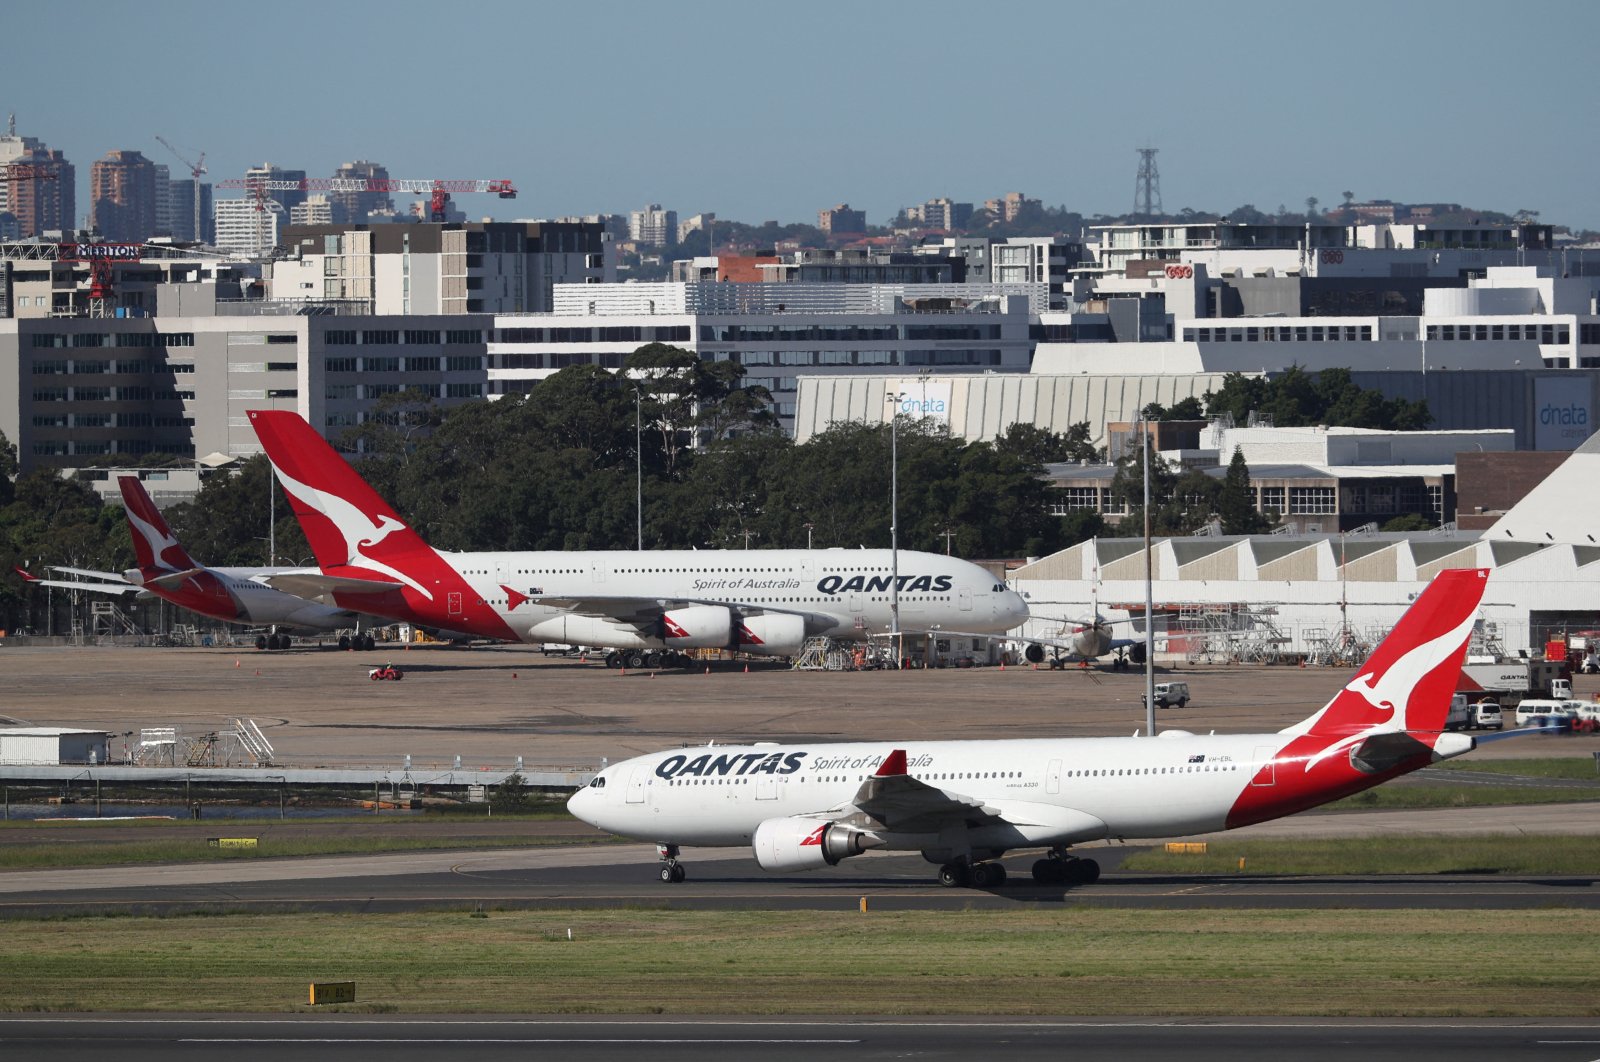 Qantas planes are seen at Kingsford Smith International Airport, Sydney, Australia, March 18, 2020. (Reuters Photo)